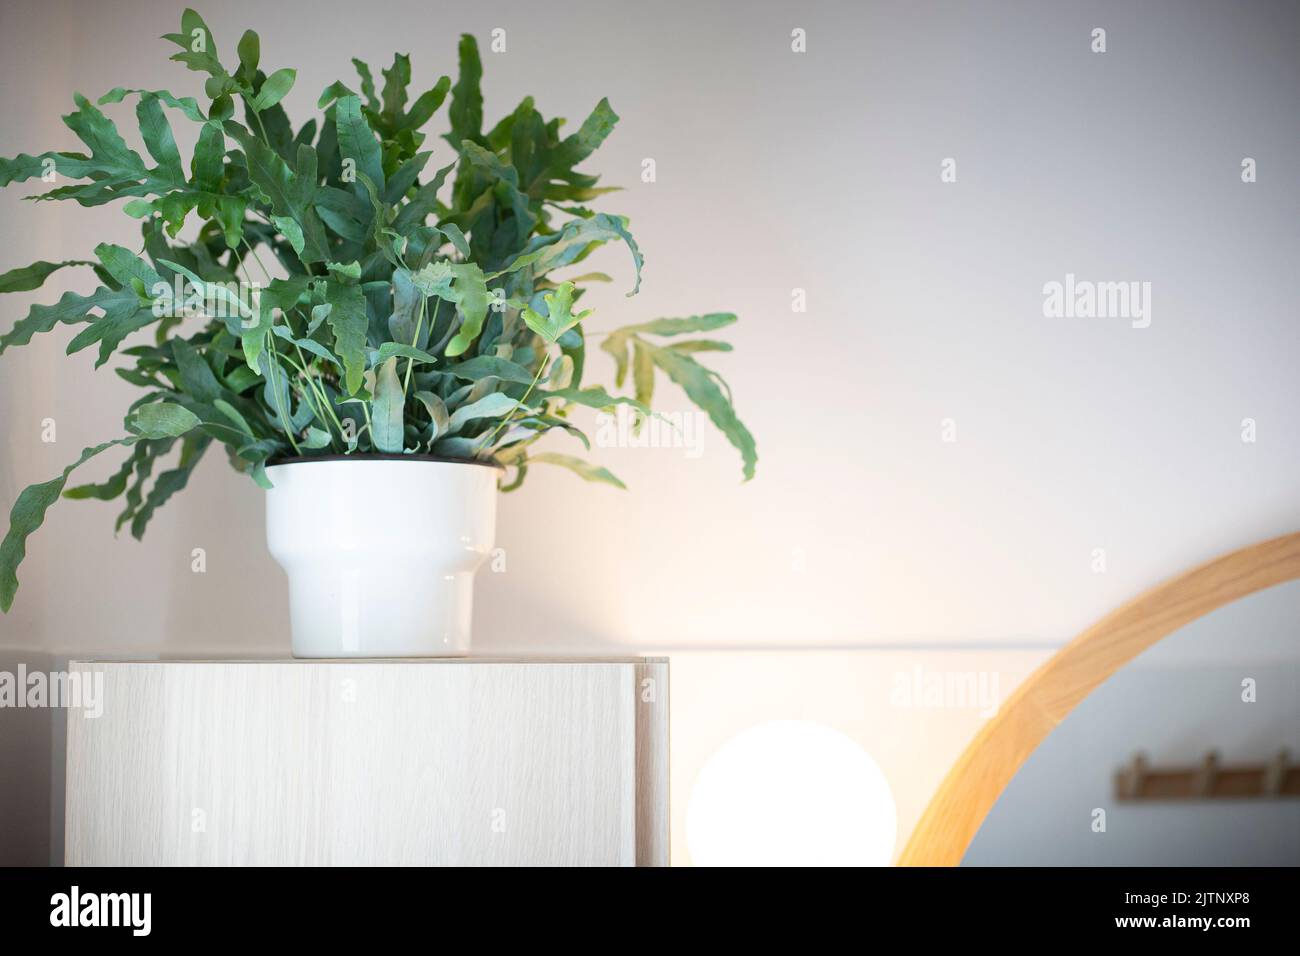 A plant of Blue Star fern (Phlebodium aureum), a fancy houseplant, on top of a wooden cabinet in  a bathroom. Stock Photo